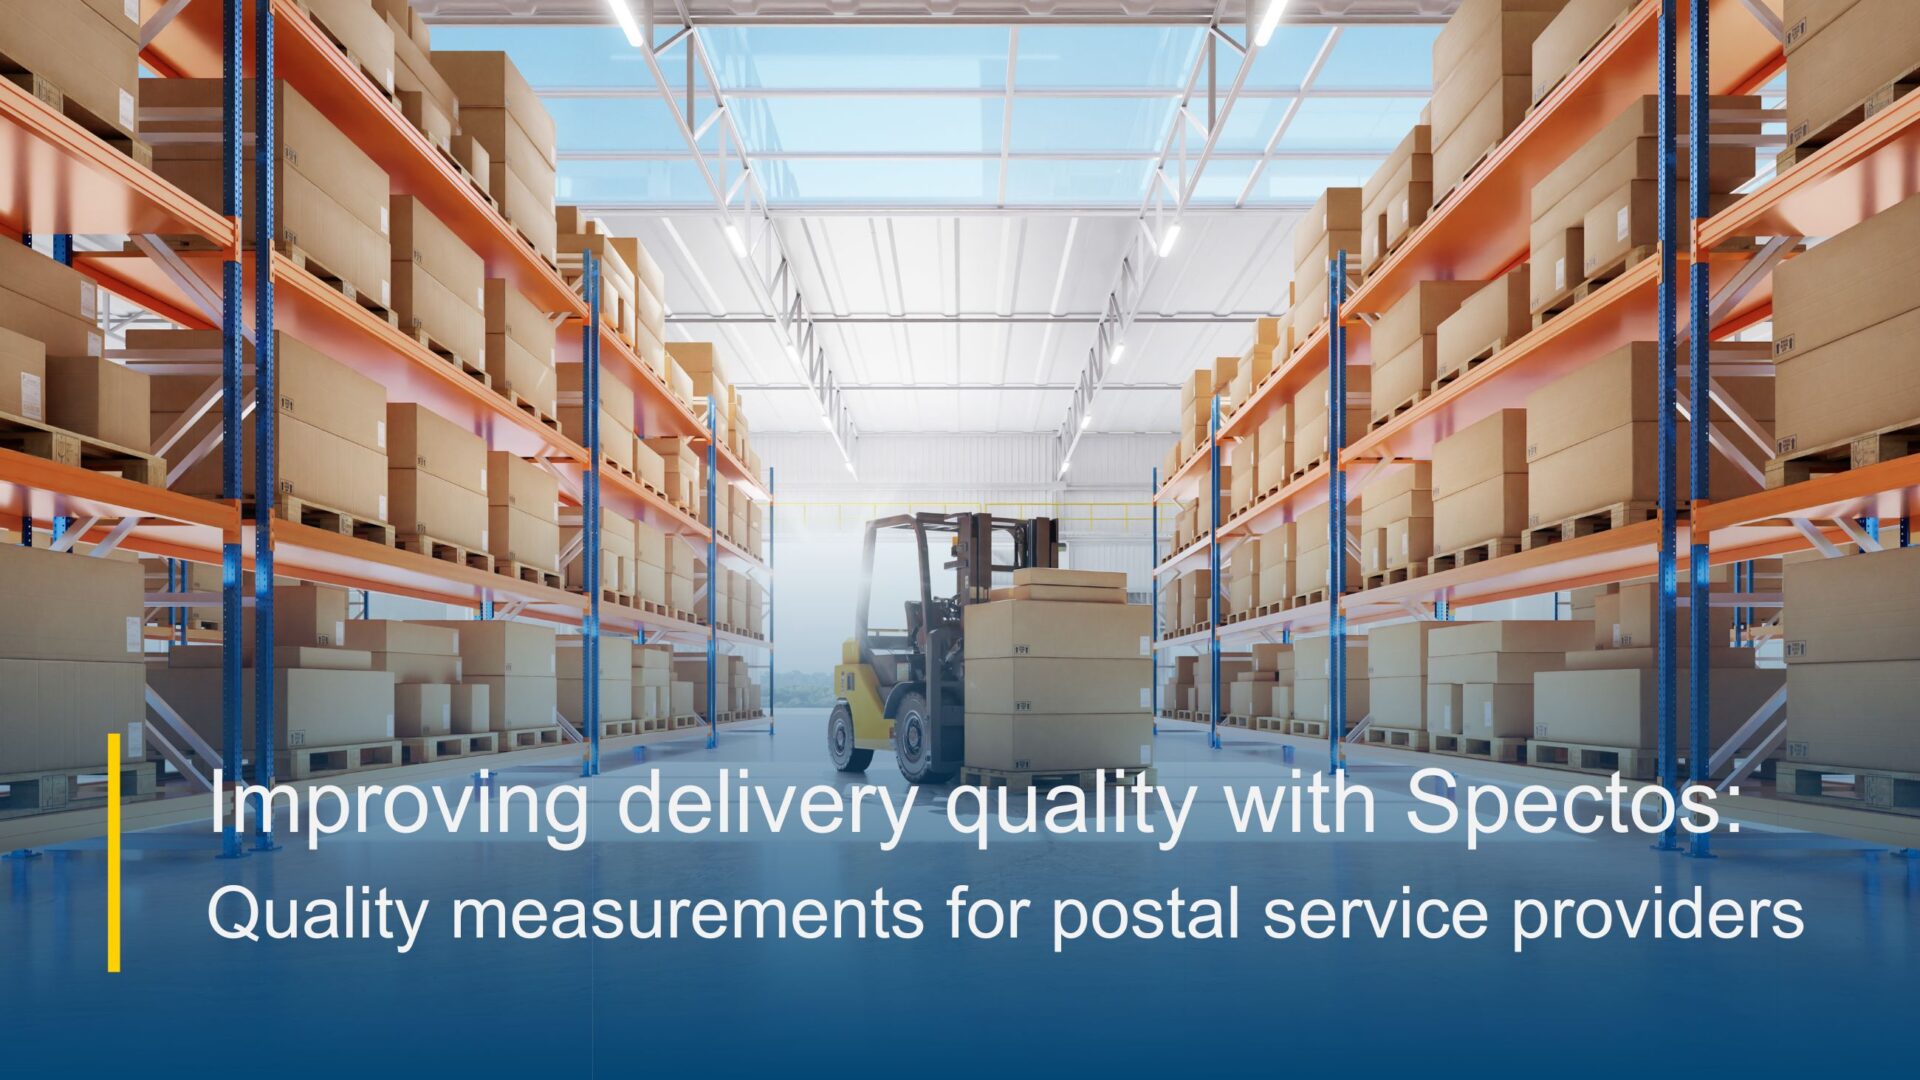 Improving service and delivery: Quality measurements for postal service providers